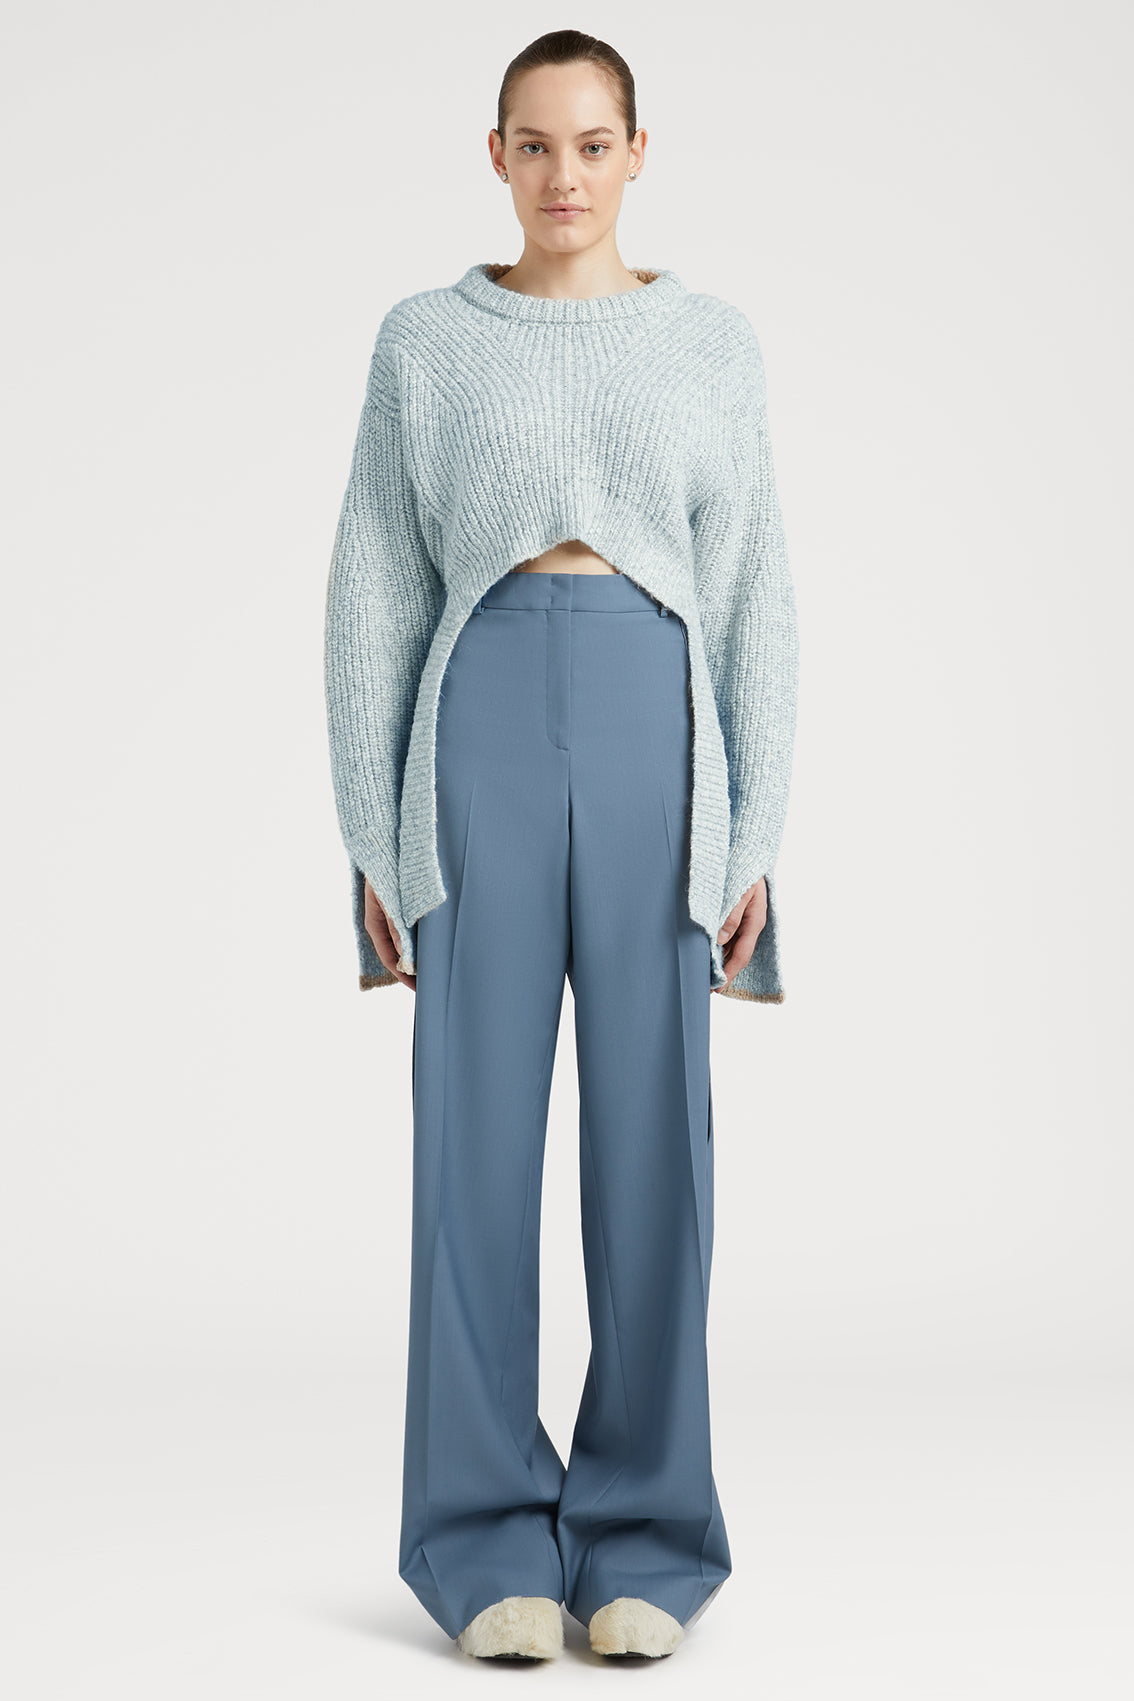 Crew Neck Cropped Sweater Top in Sky Blue